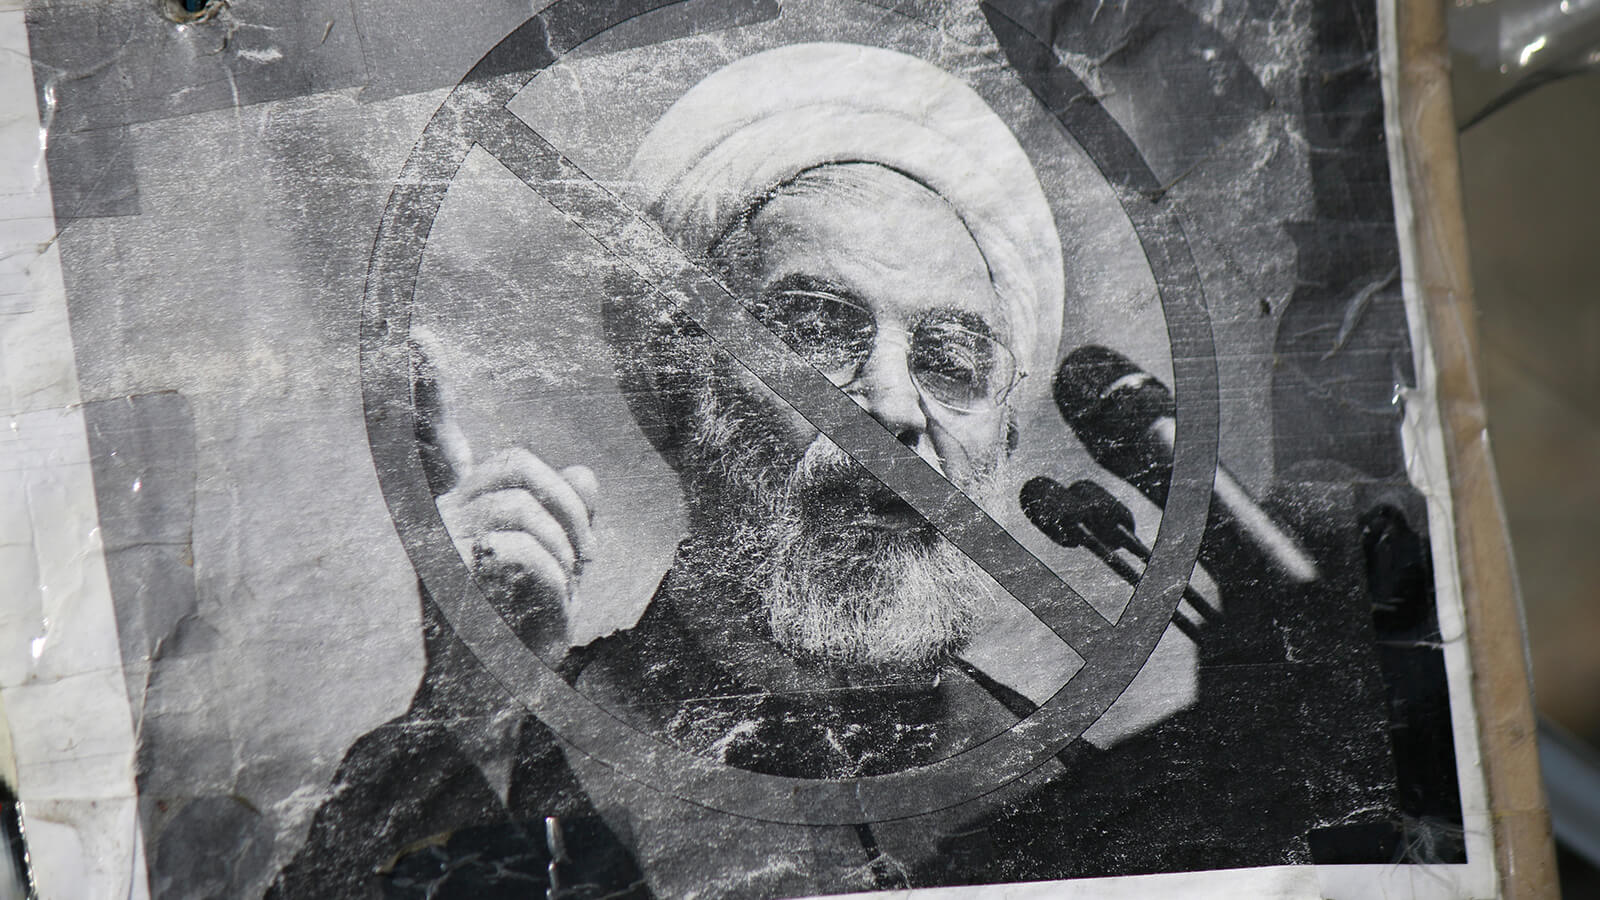 Image of protest poster featuring former Iranian president Hassan Rouhani who was in power from 2013 to 2021